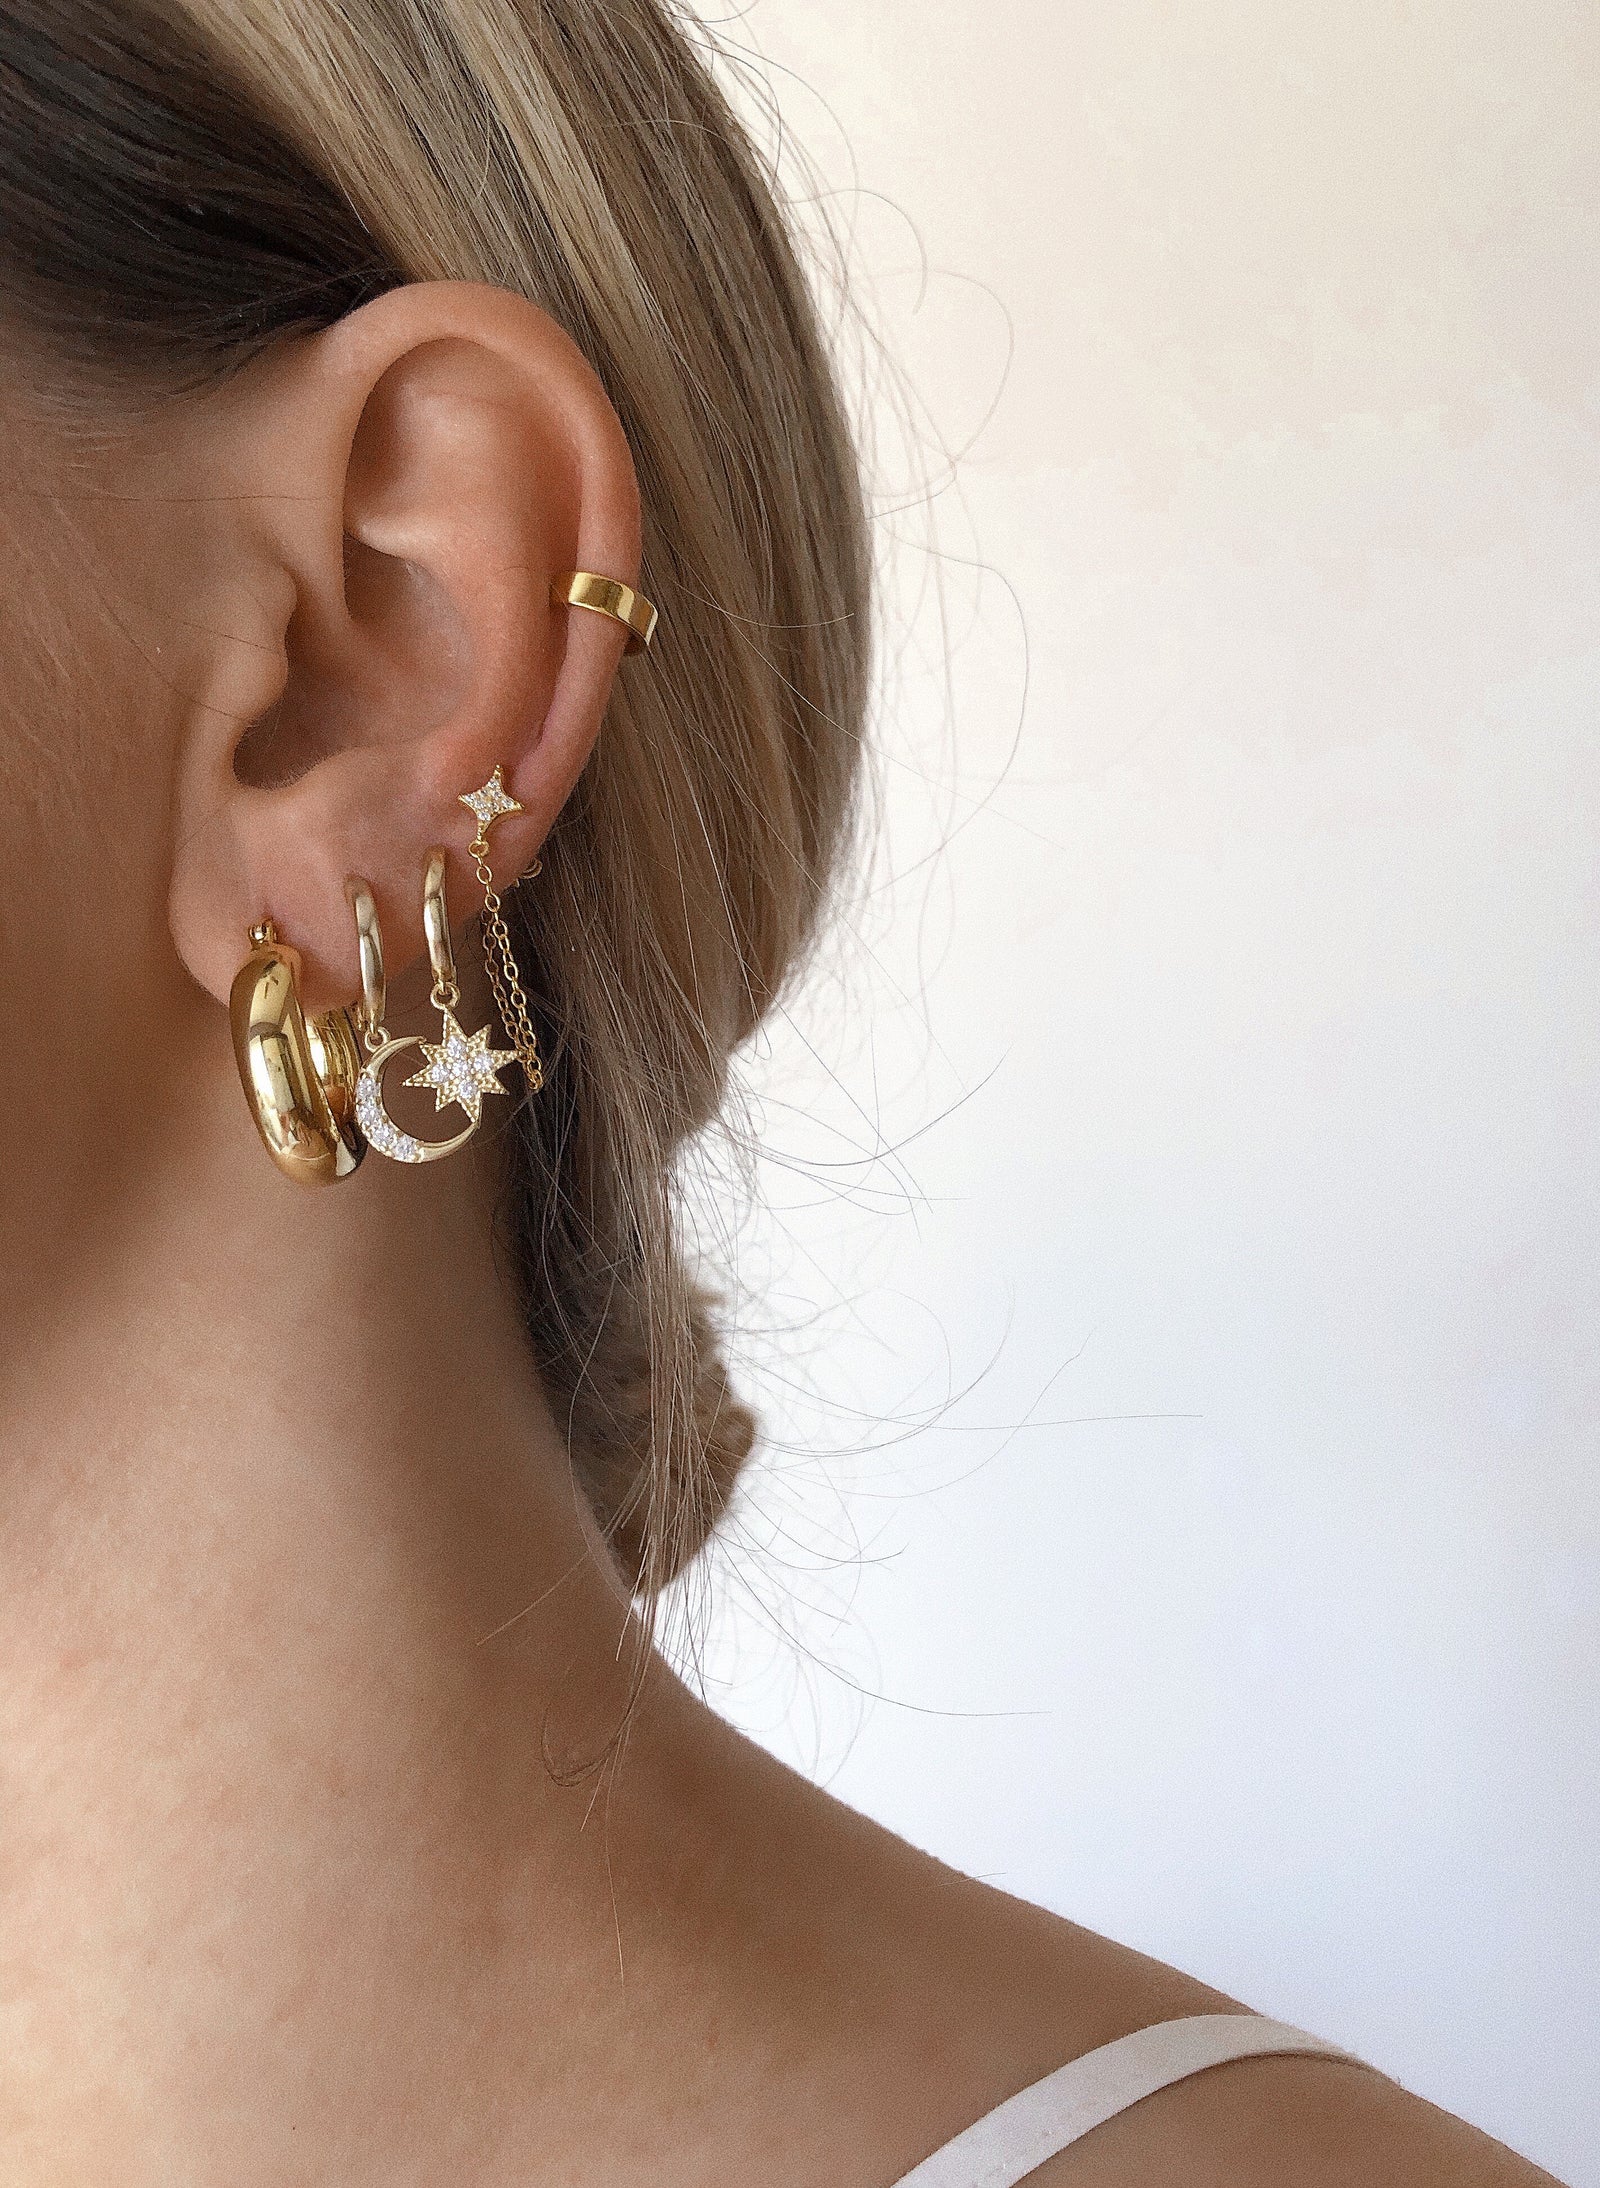 ear stack with star and moon hoop earrings